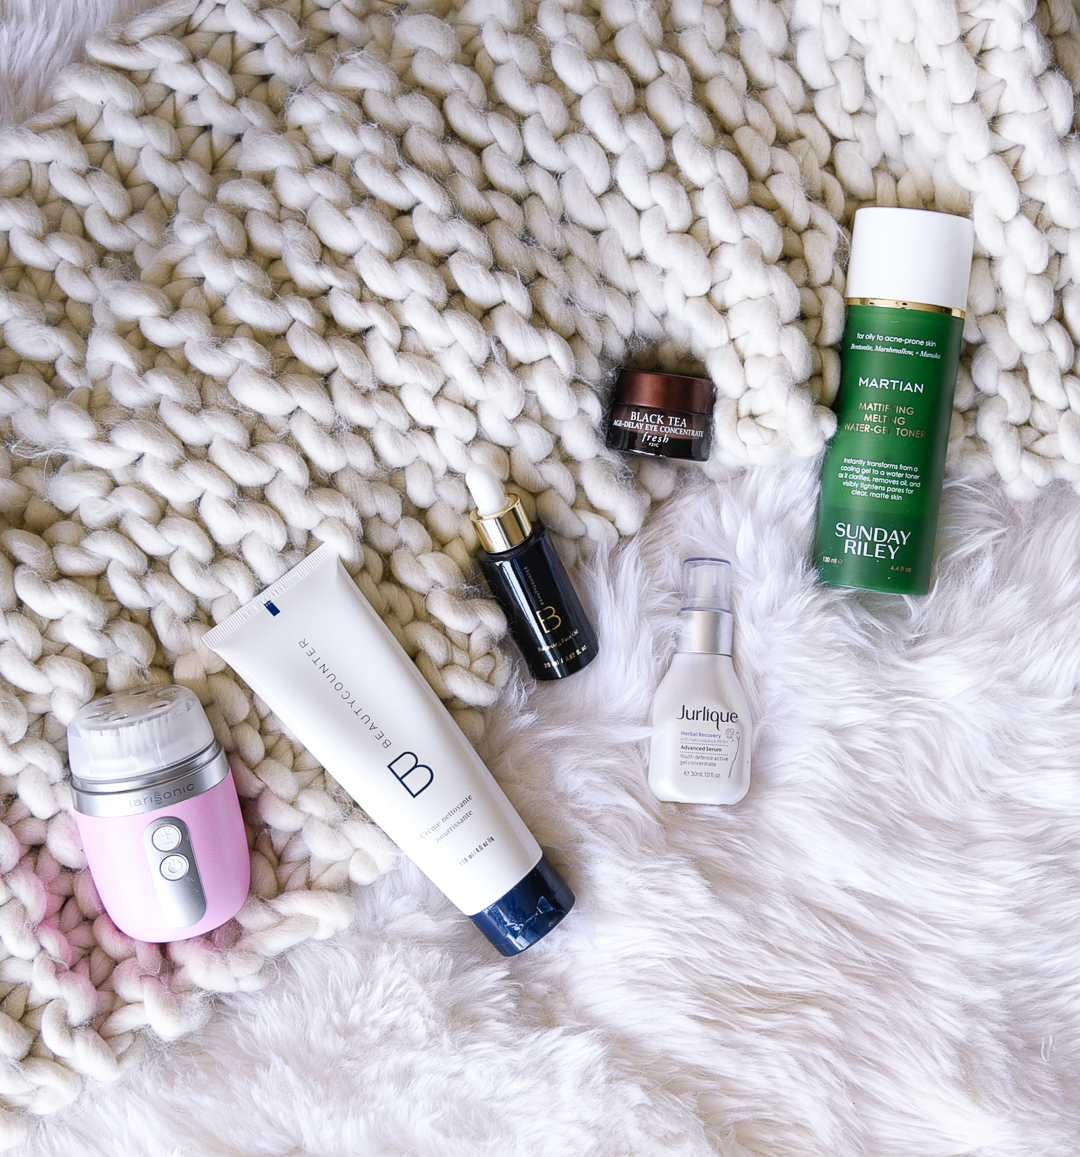 Jenna Colgrove shares her skincare secrets after 3 years in the beauty industry. - Night Skincare Routine for Sensitive Skin by Chicago style blogger Visions of Vogue